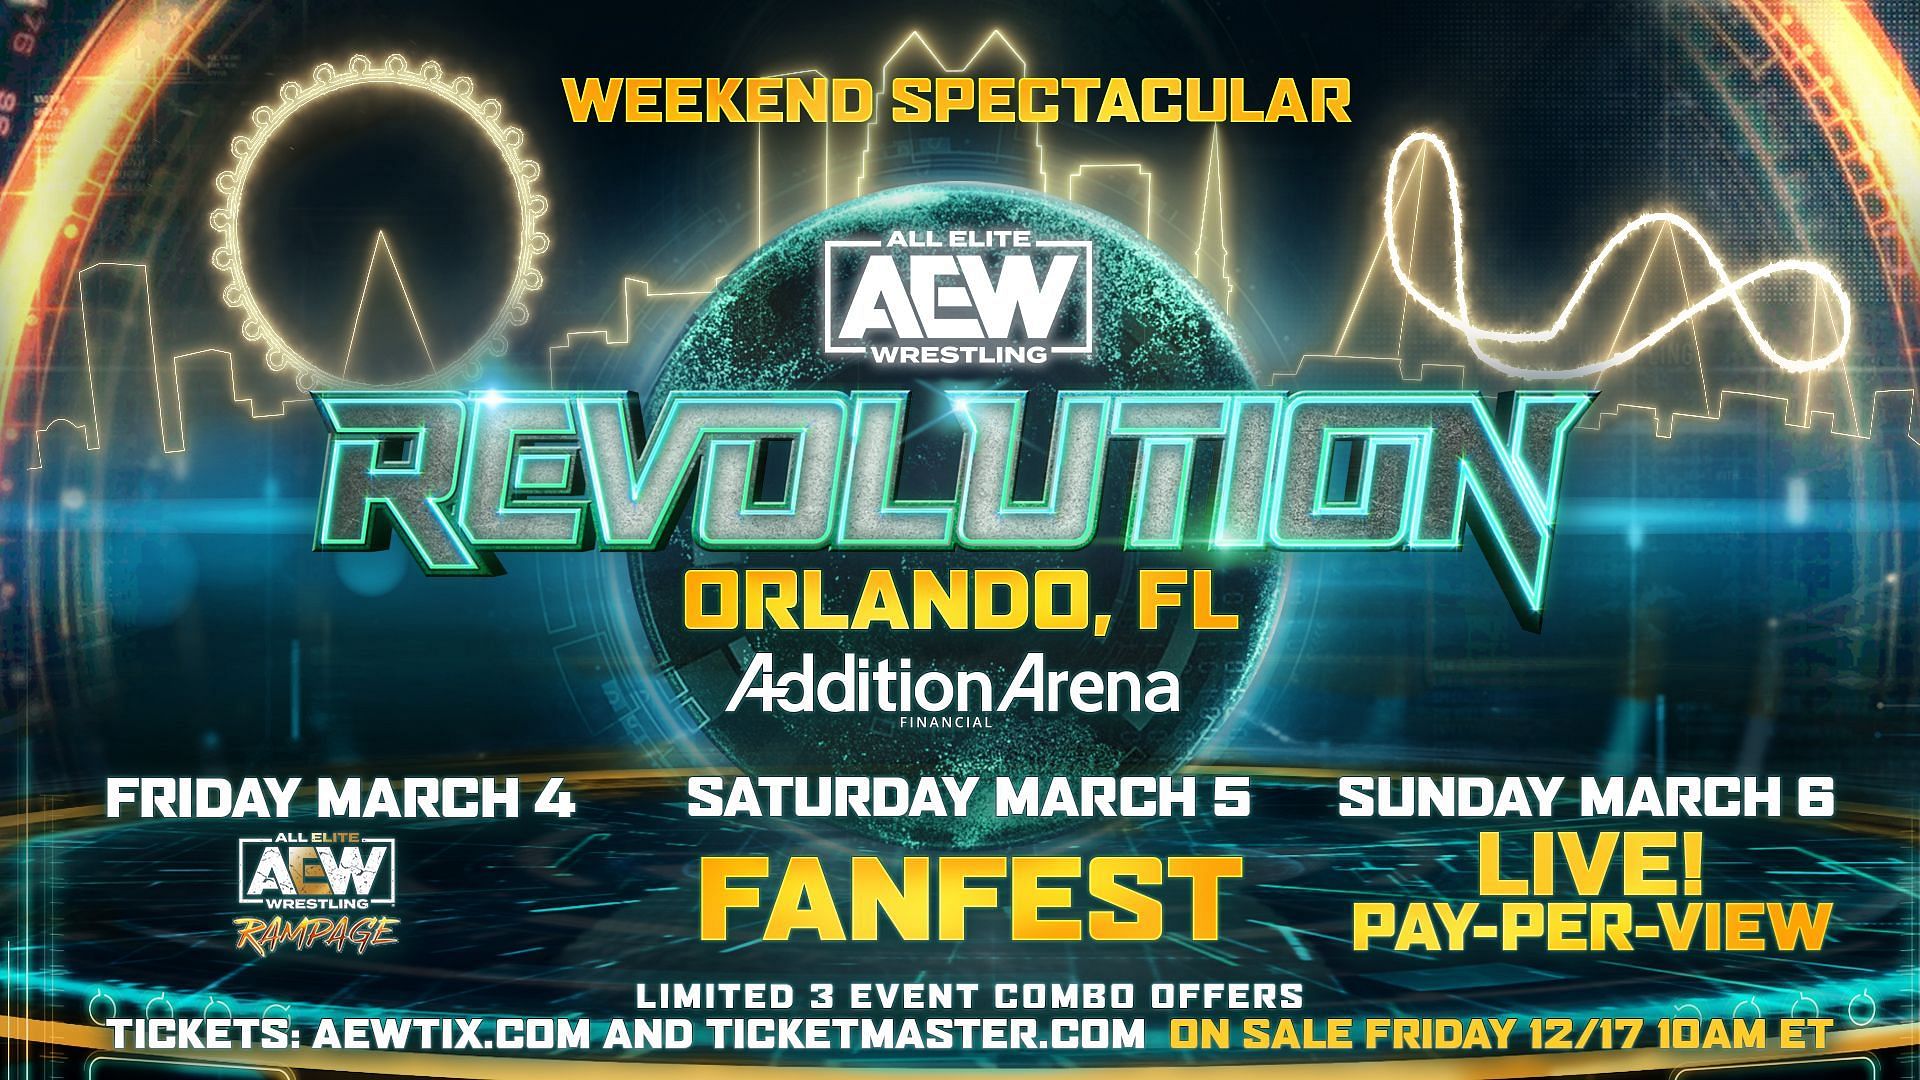 AEW Revolution will be taking place in Orlando, FL in March 2022